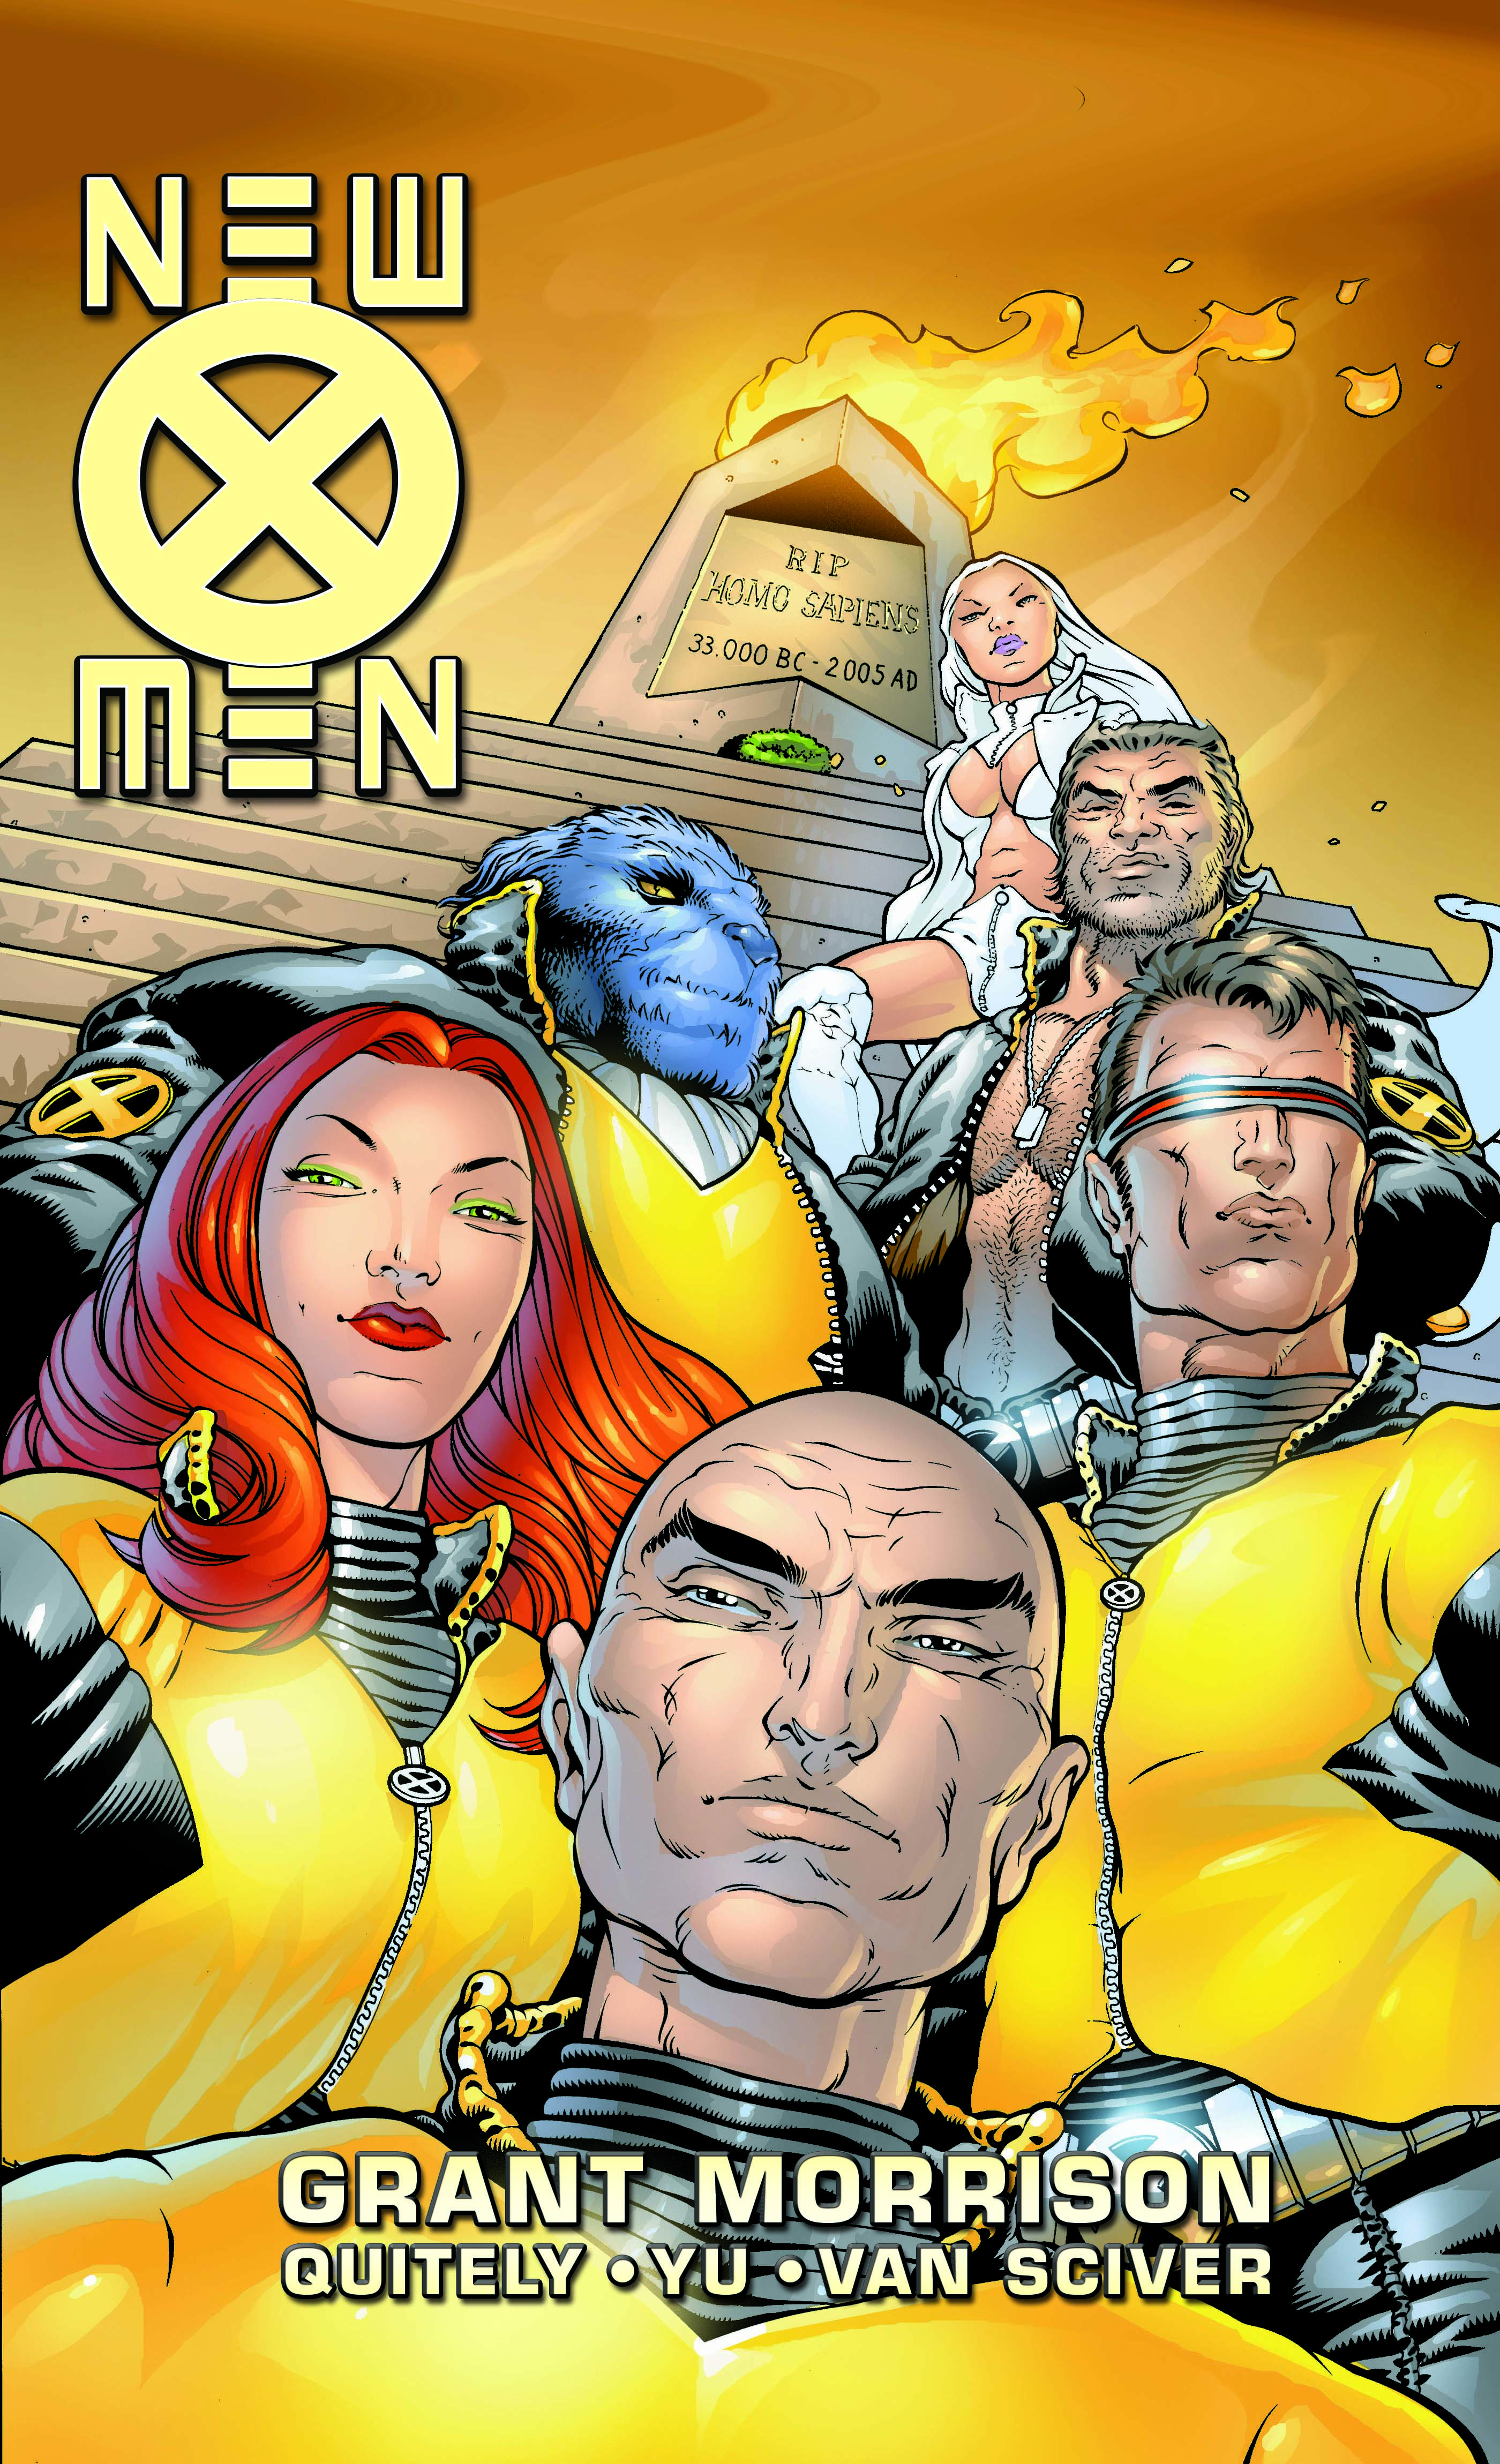 NEW X-MEN VOL. 1: E IS FOR EXTINCTION TPB (Trade Paperback)